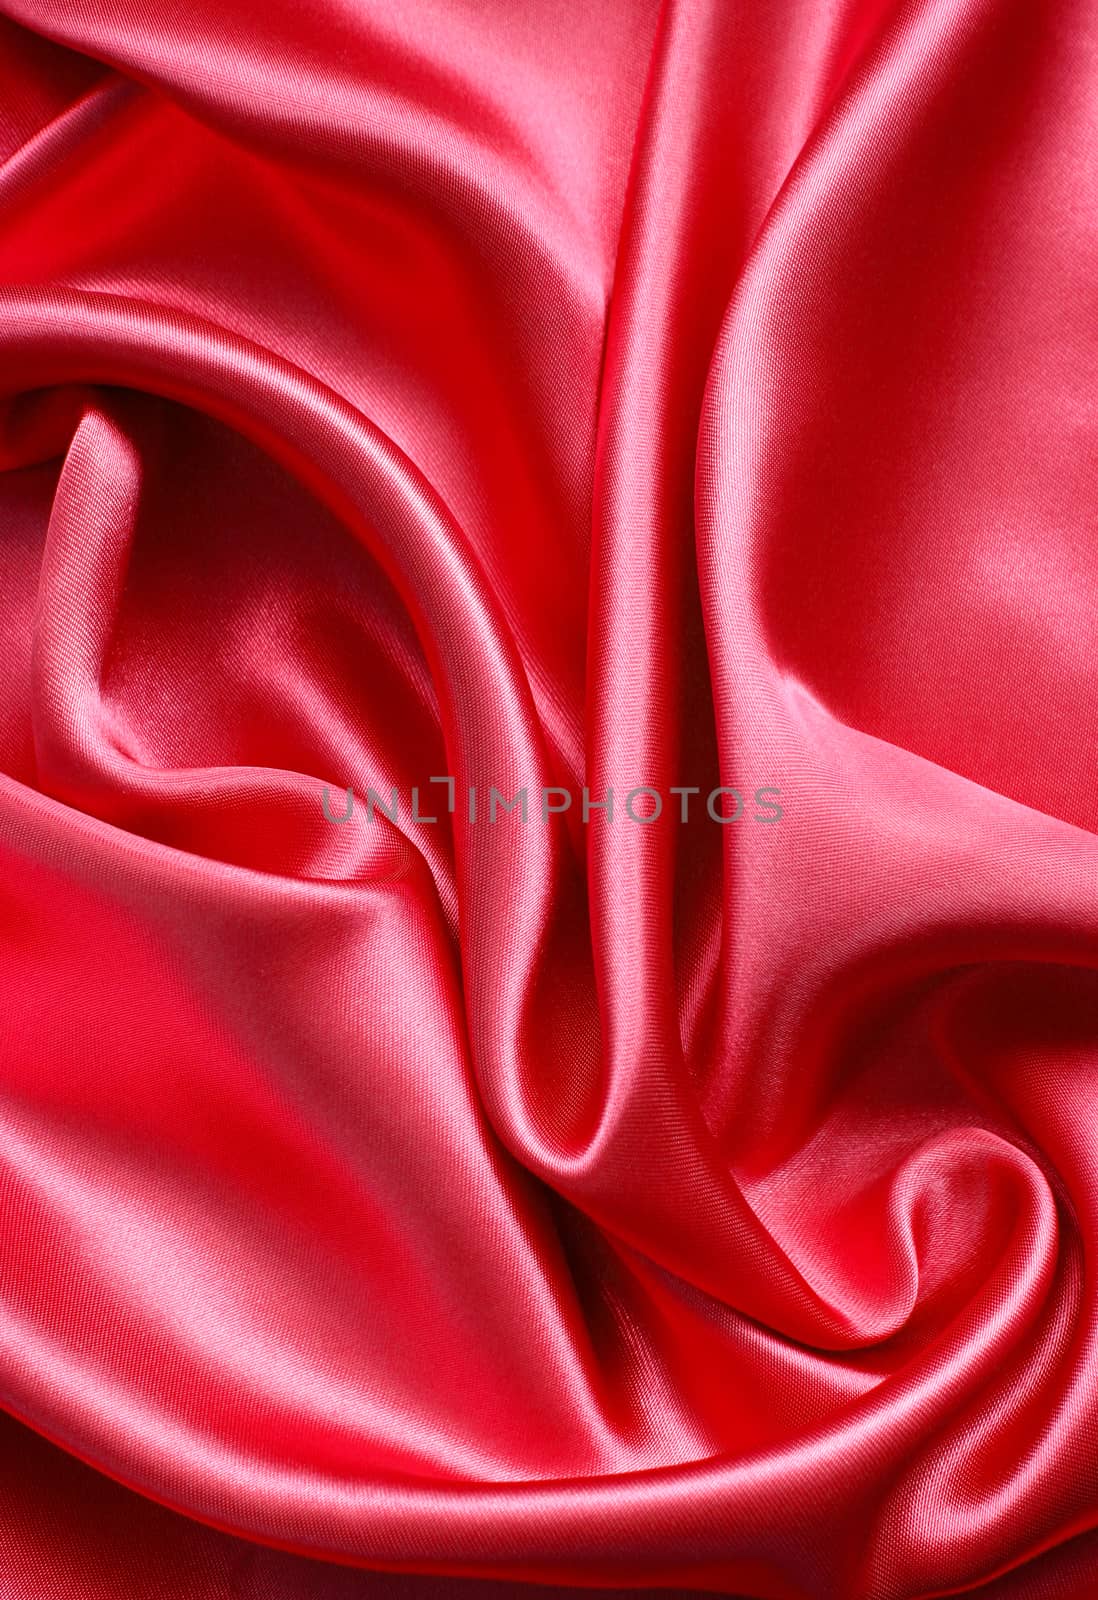 Smooth elegant red silk as background  by oxanatravel